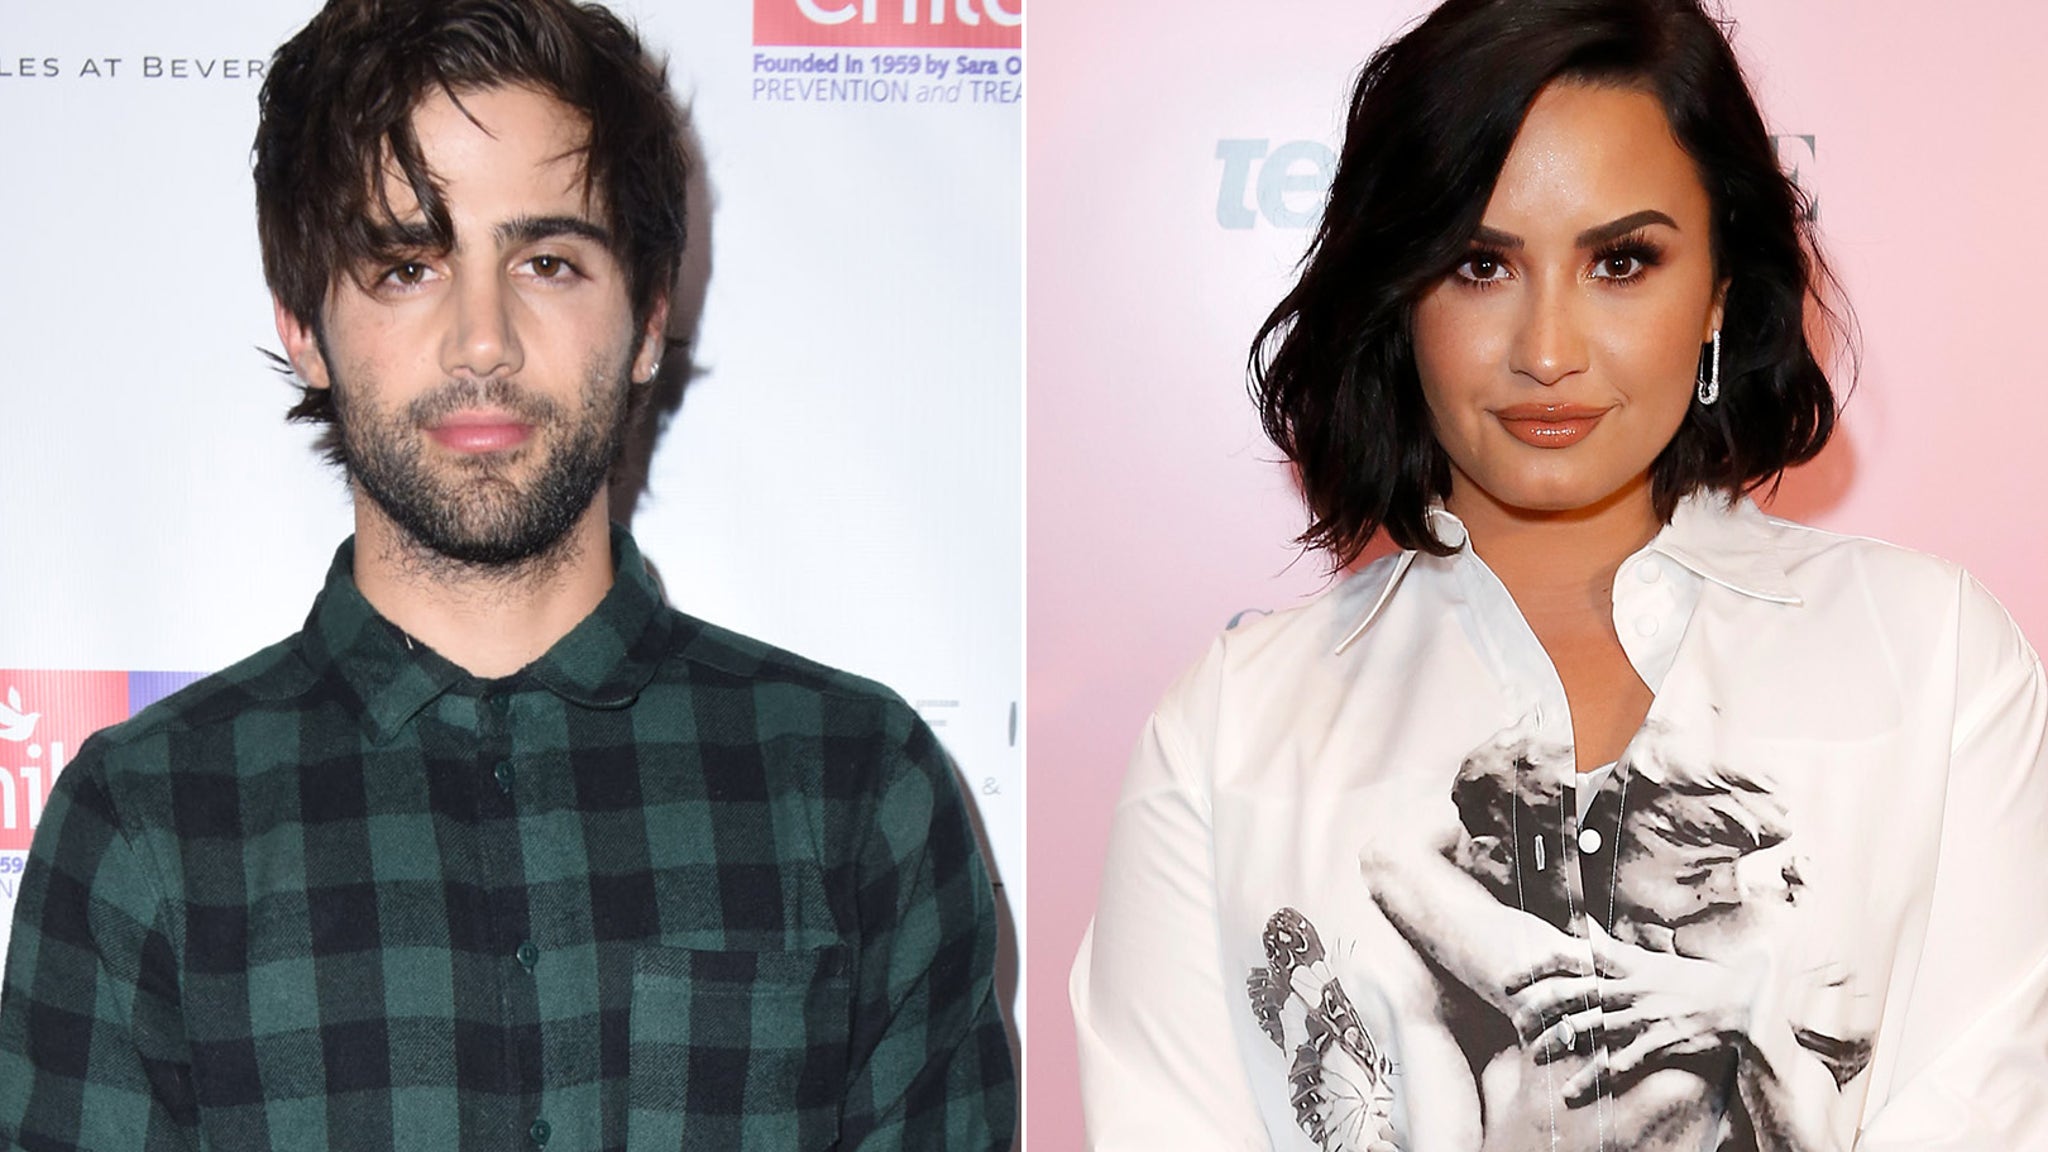 Max Ehrich Reportedly Knew About Demi Lovato Breakup Before 'Tabloid' Reports - TooFab